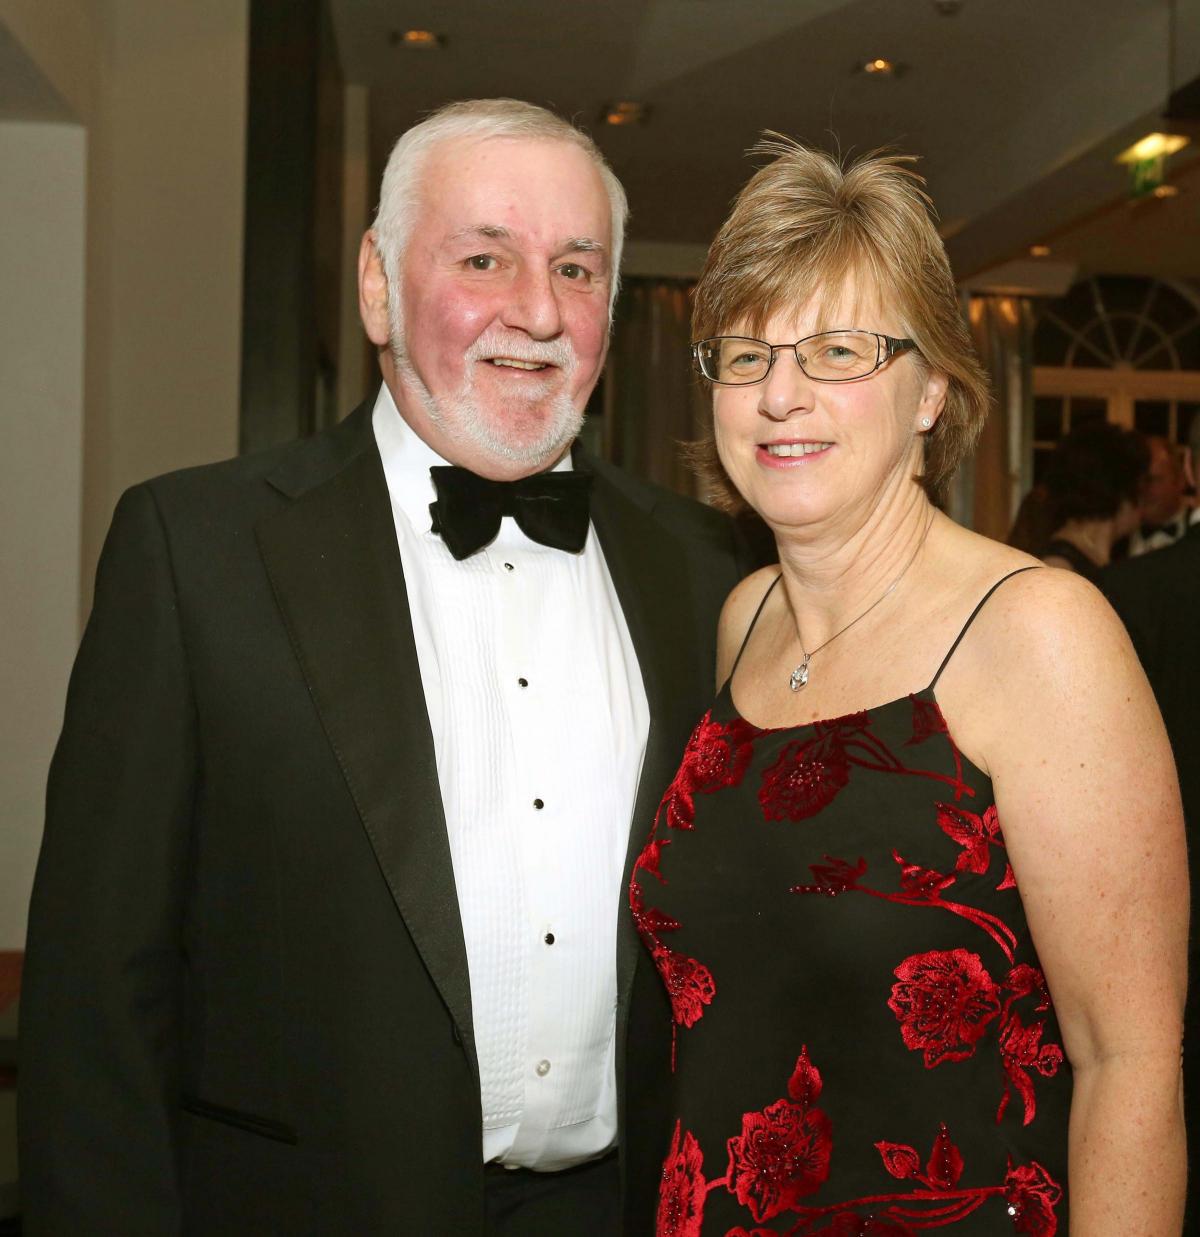 The Masonic Ladies Night at Scotch Corner Hotel.
Mike and Karen Whitelaw.
Picture: Richard Doughty Photography